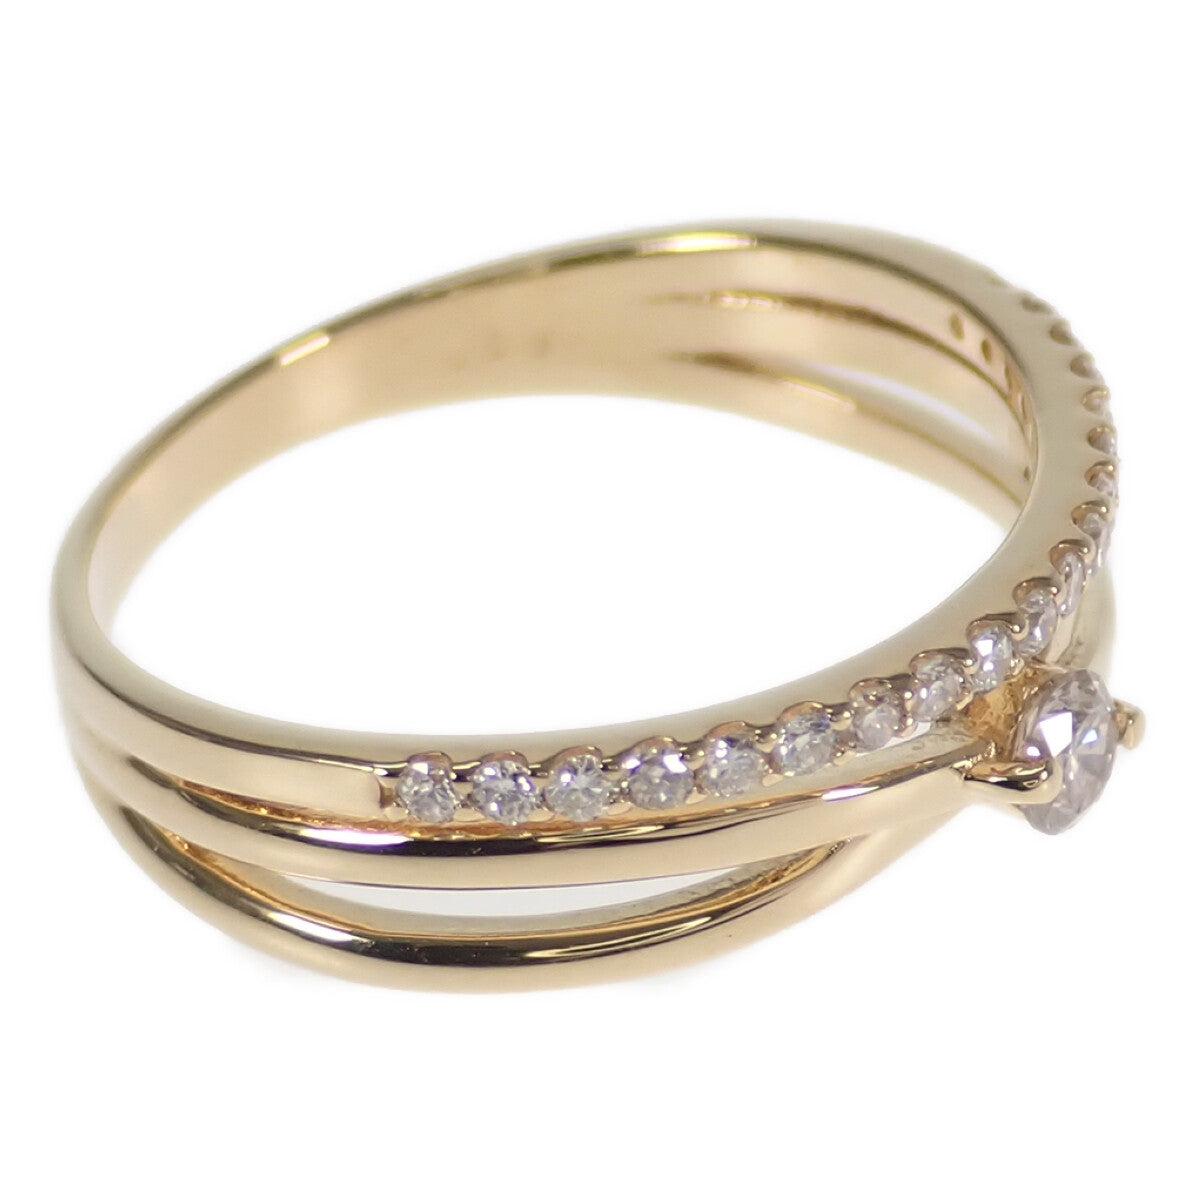 [LuxUness]  Graceful Design K18YG 0.20ct Diamond Ring Set in K18 Yellow Gold, Women's Size 11 in Gold   in Excellent condition